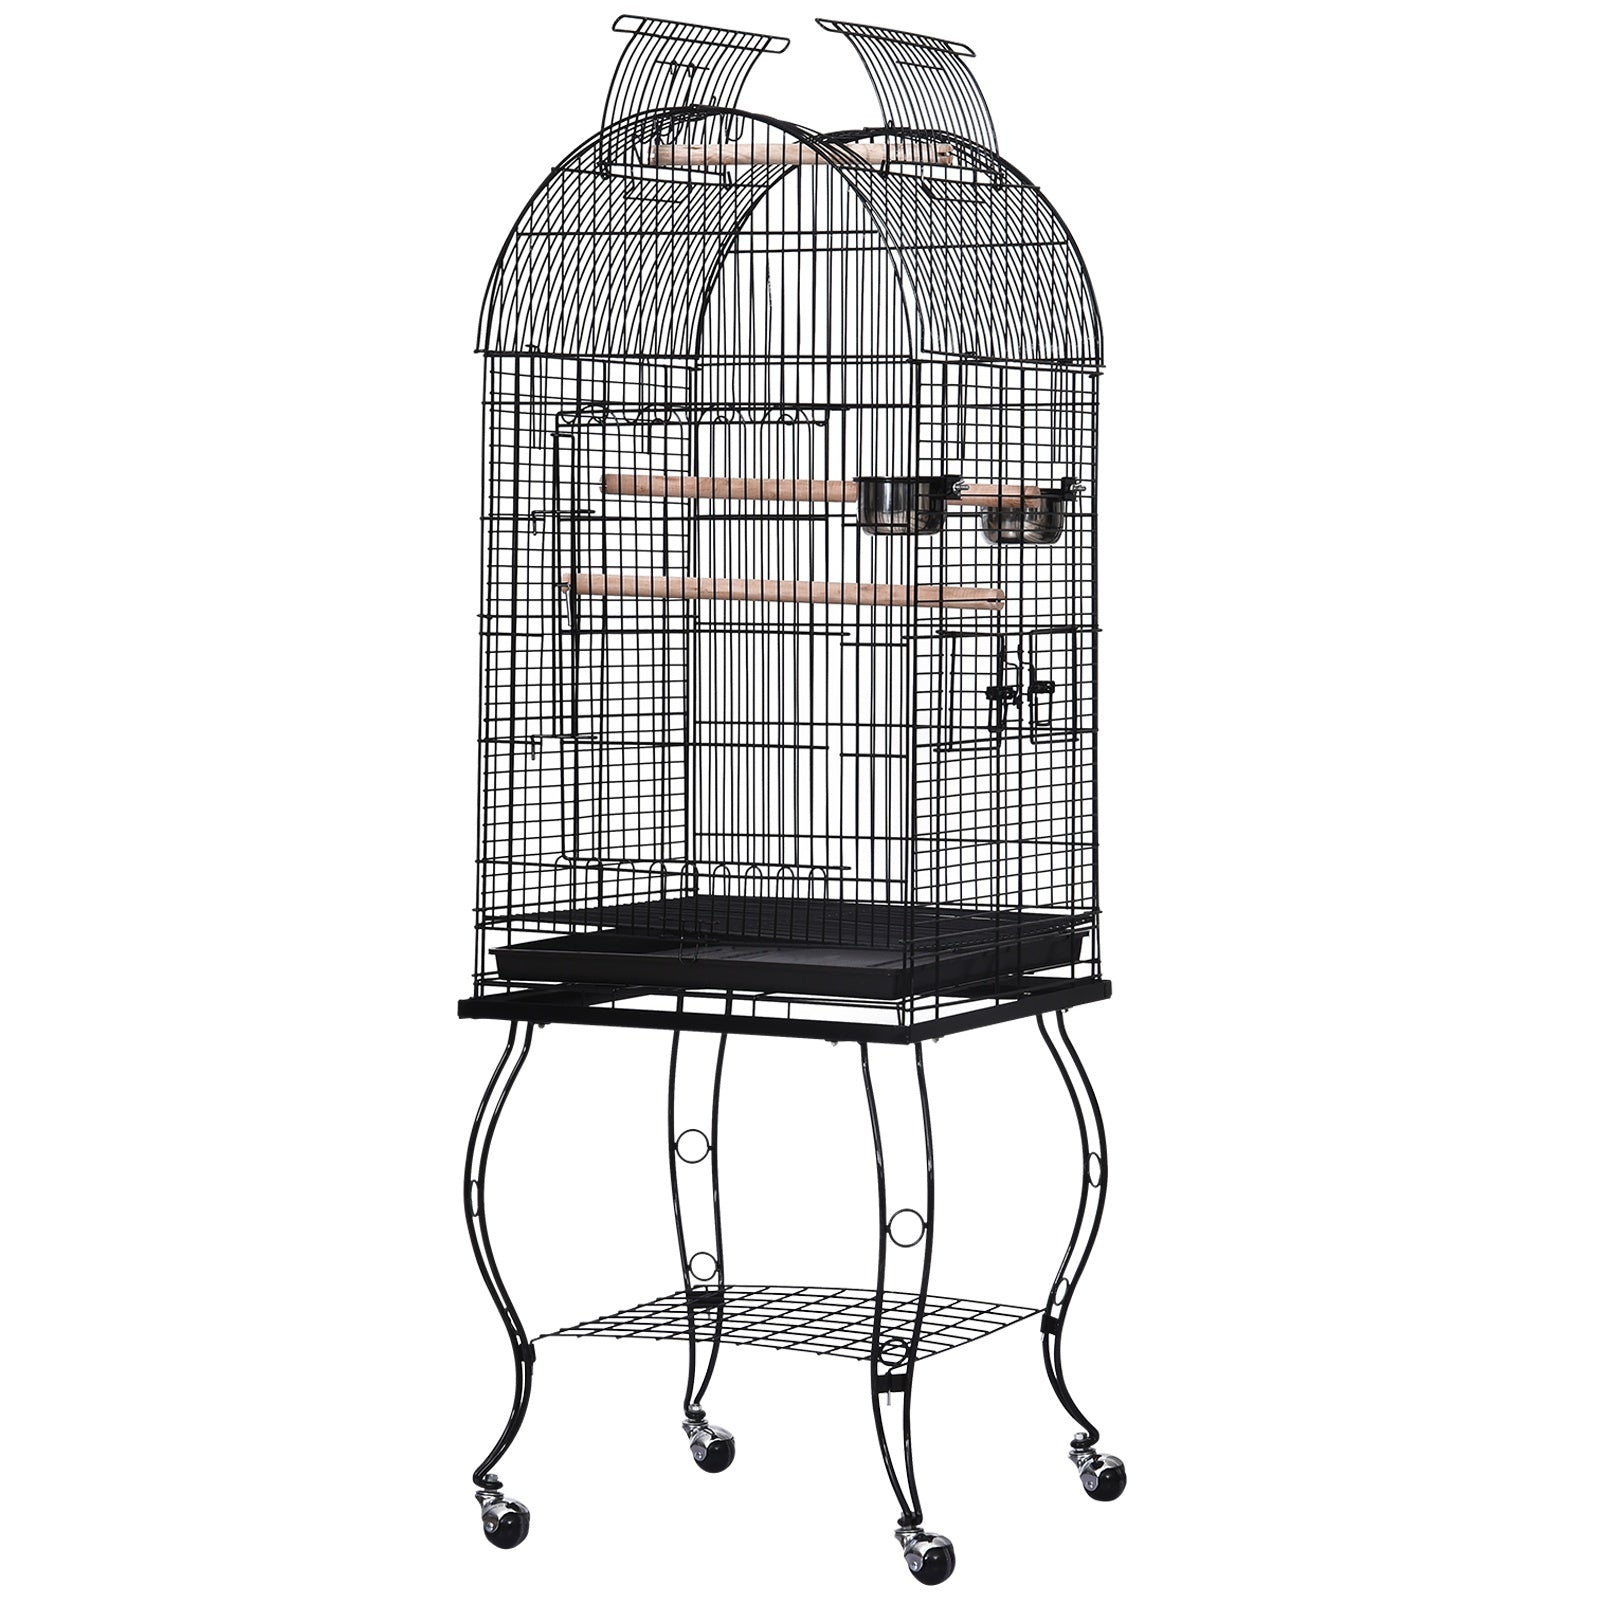 Bird Cage 51Lx51Wx137H cm, Metal Wire, Steel Pipe-Black